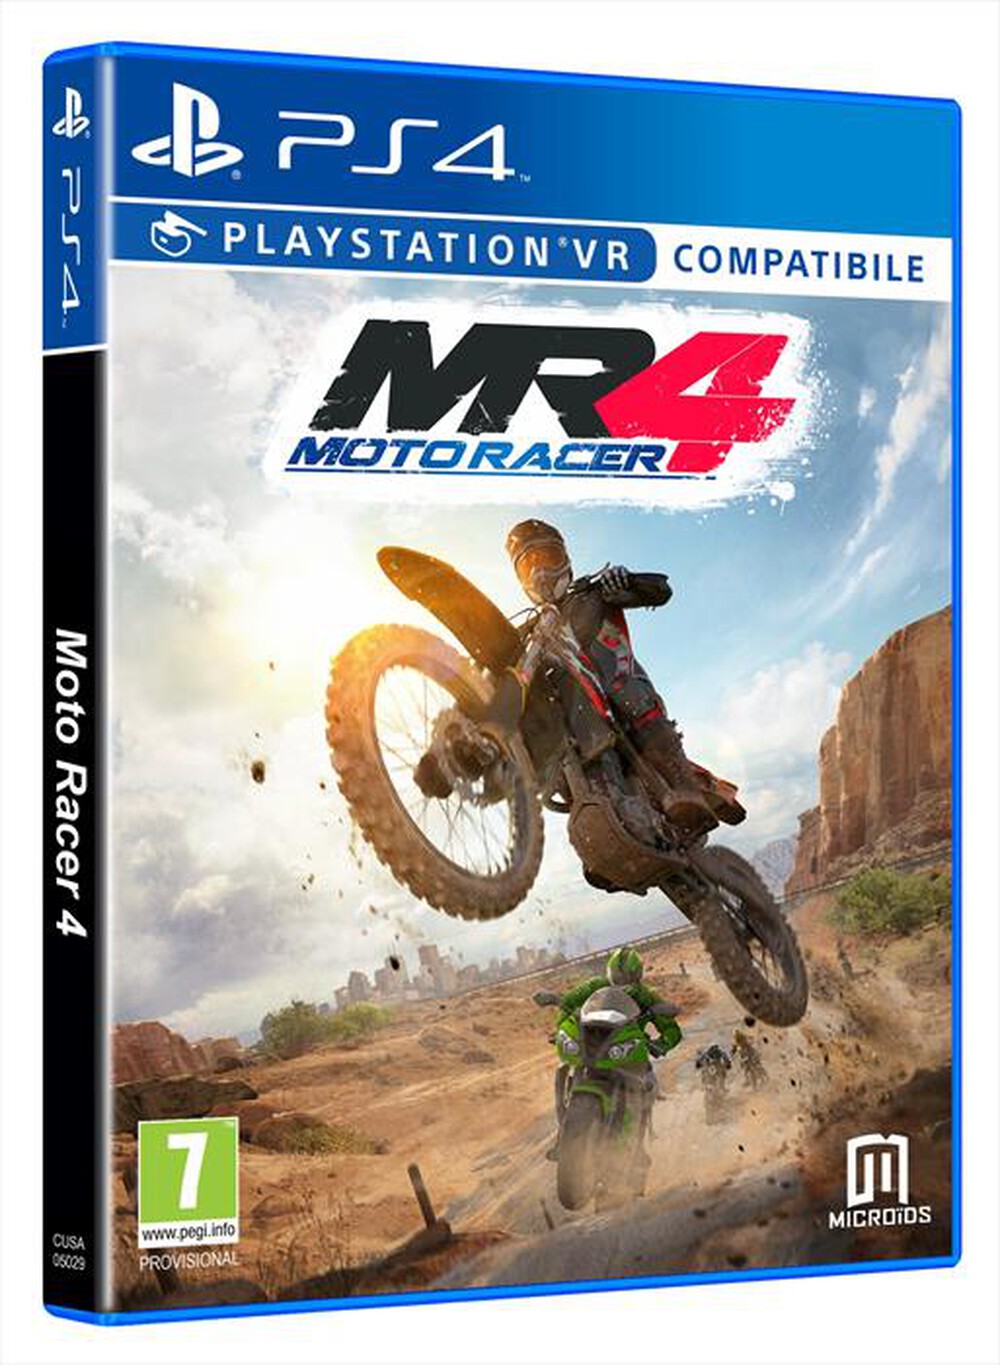 "MICROIDS - MOTO RACER 4  PS4"